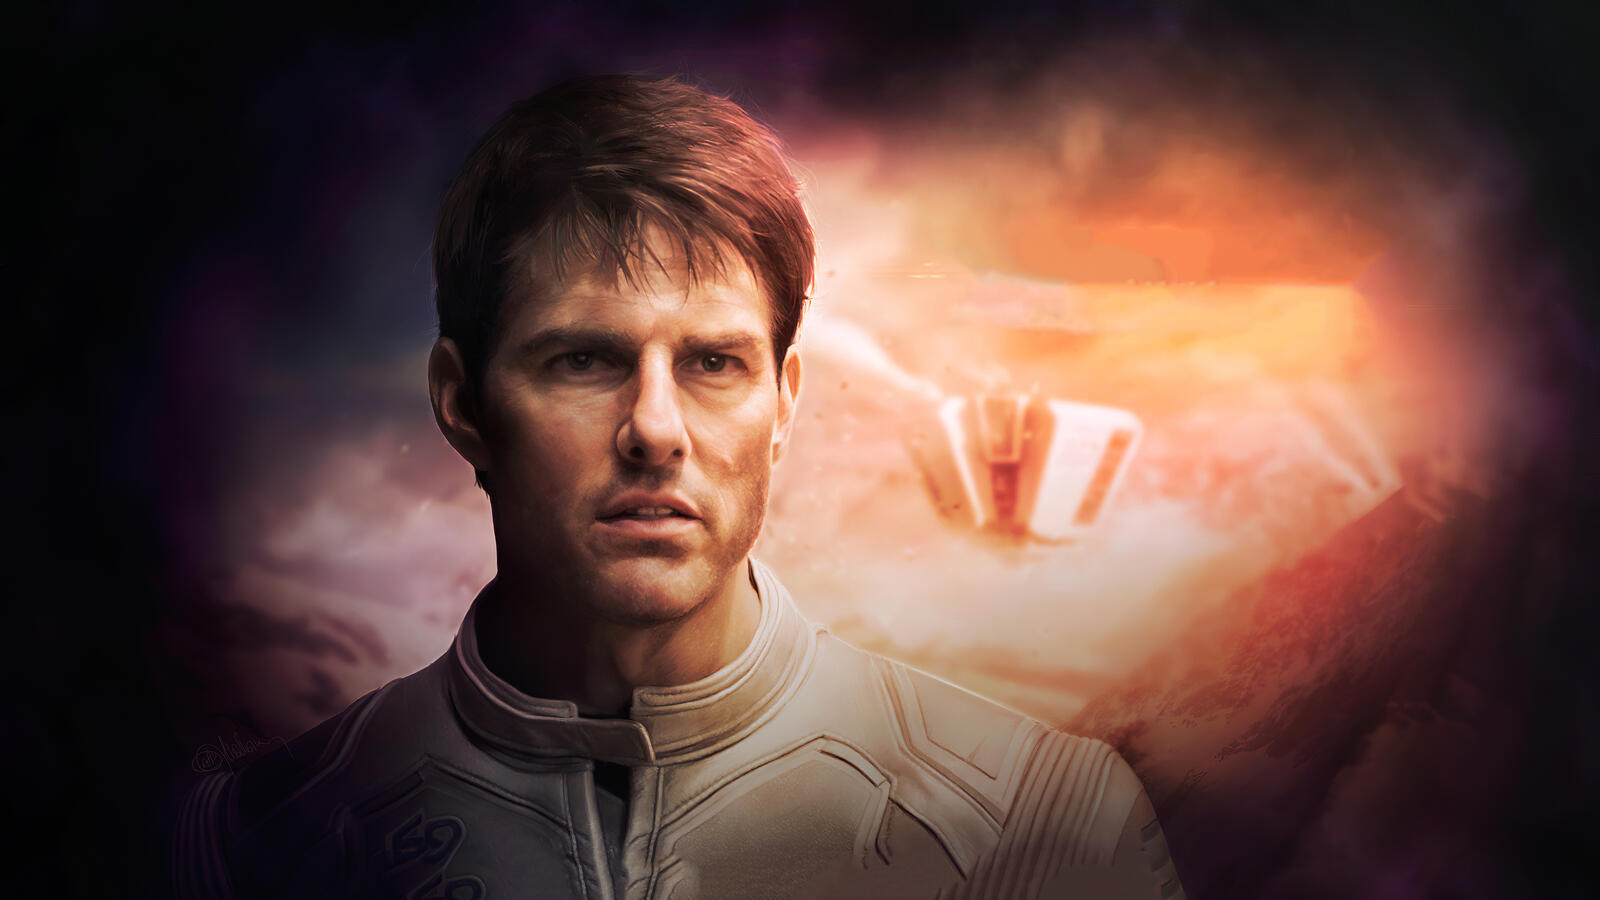 Wallpapers oblivion movies Tom Cruise on the desktop